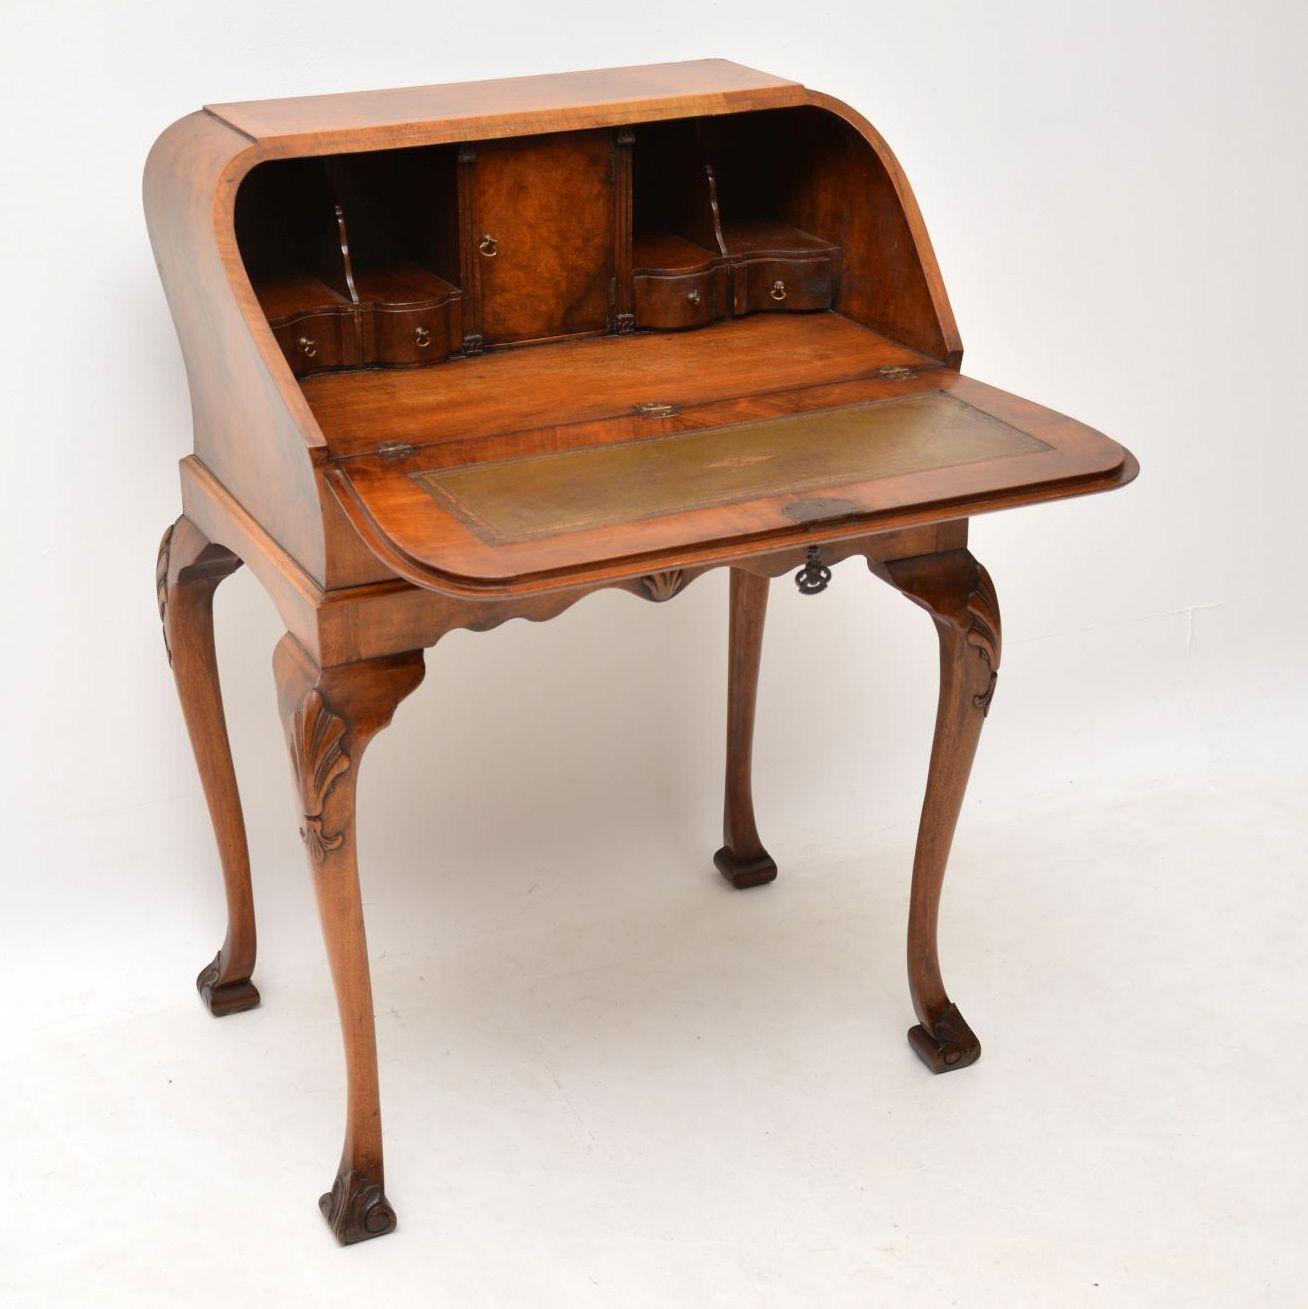 Beautifully shaped antique burr walnut bureau in excellent condition and dating from the 1920s period. It has some lovely features and a nice warm color, plus full of character. The outside of the writing surface and the top are both cross banded in